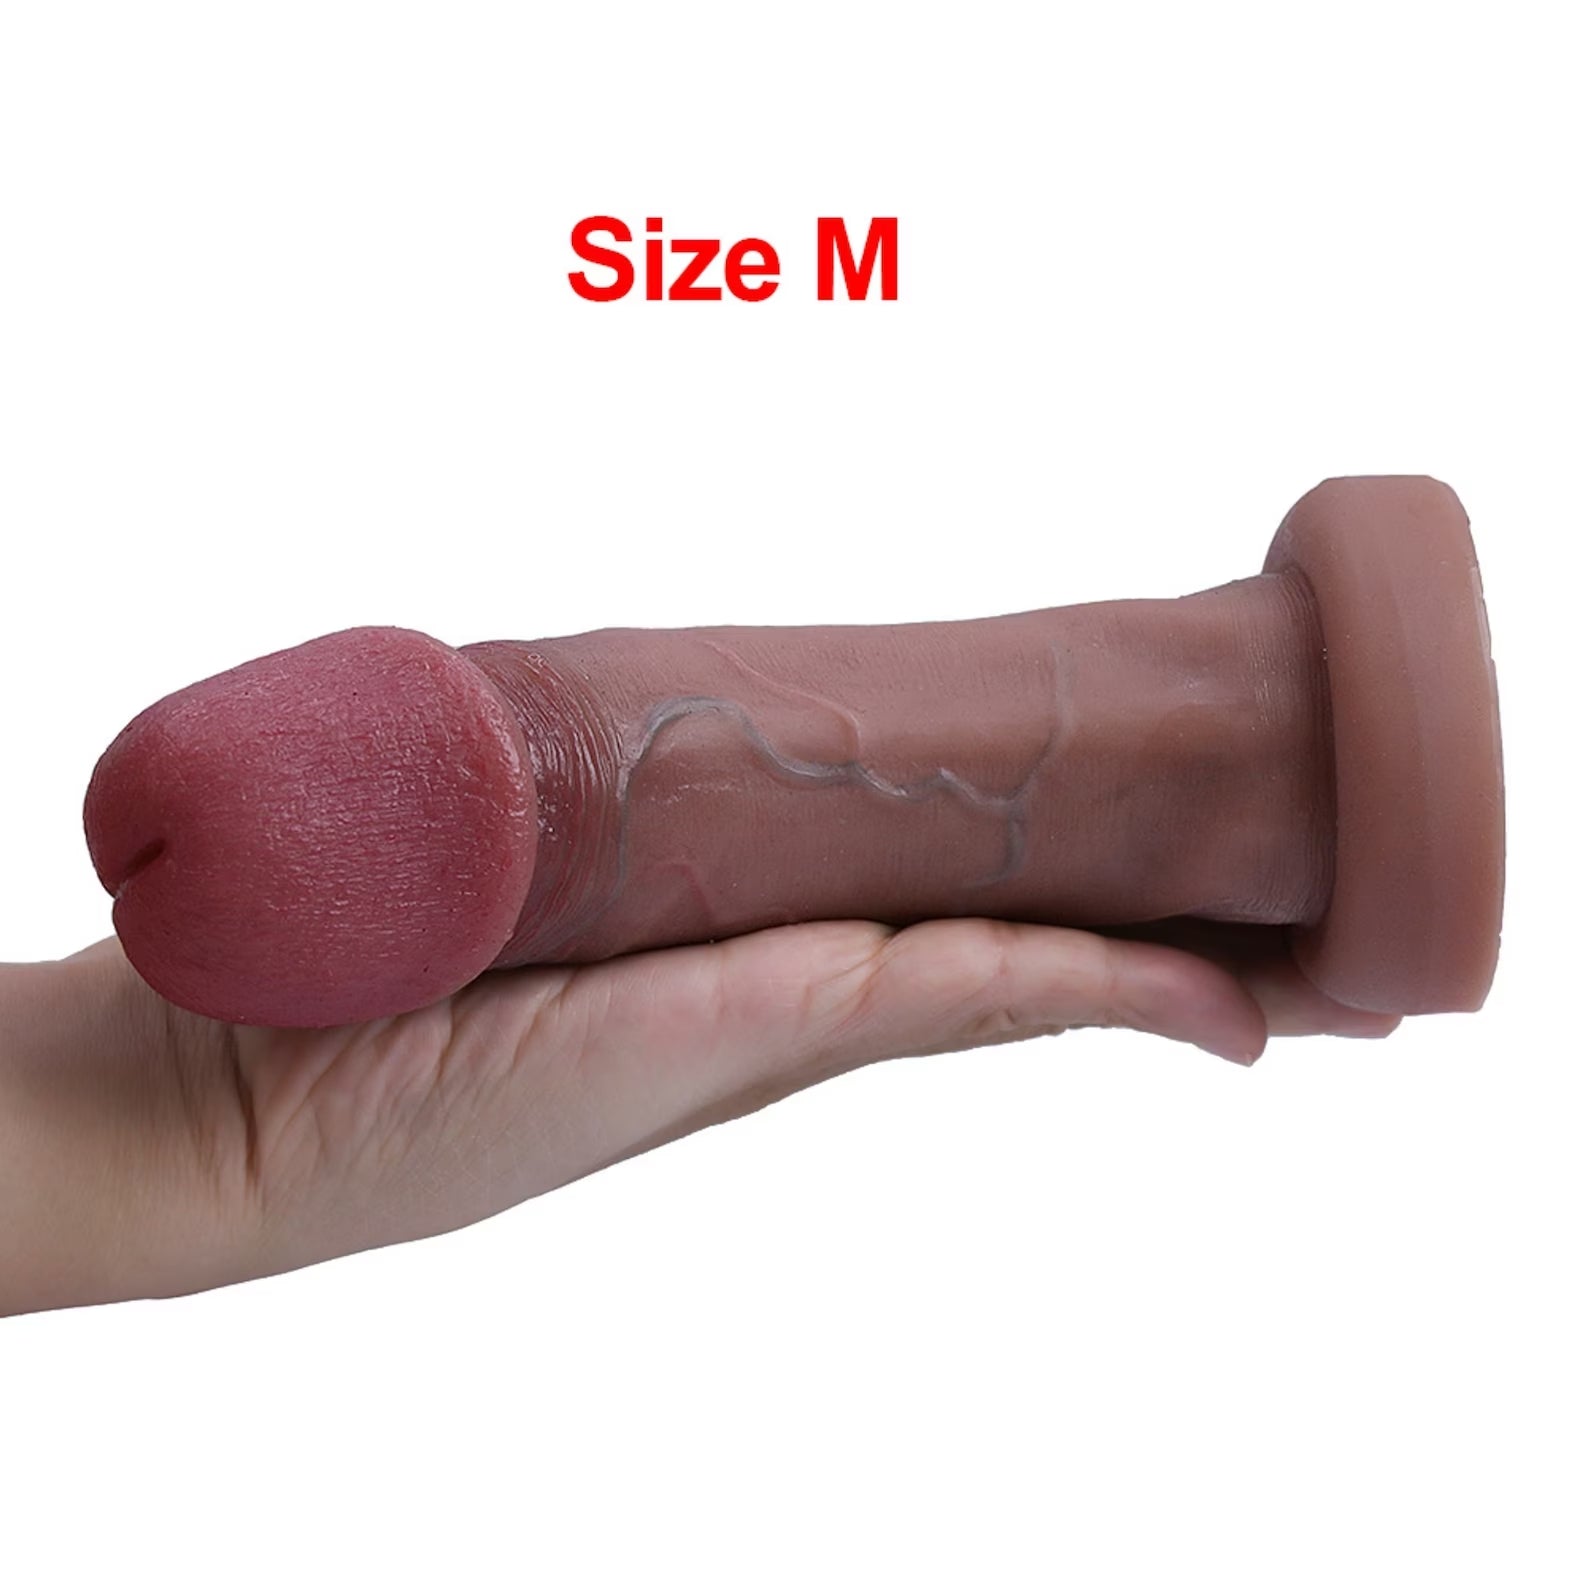 Very realistic dildo with big glans 7.9 inches